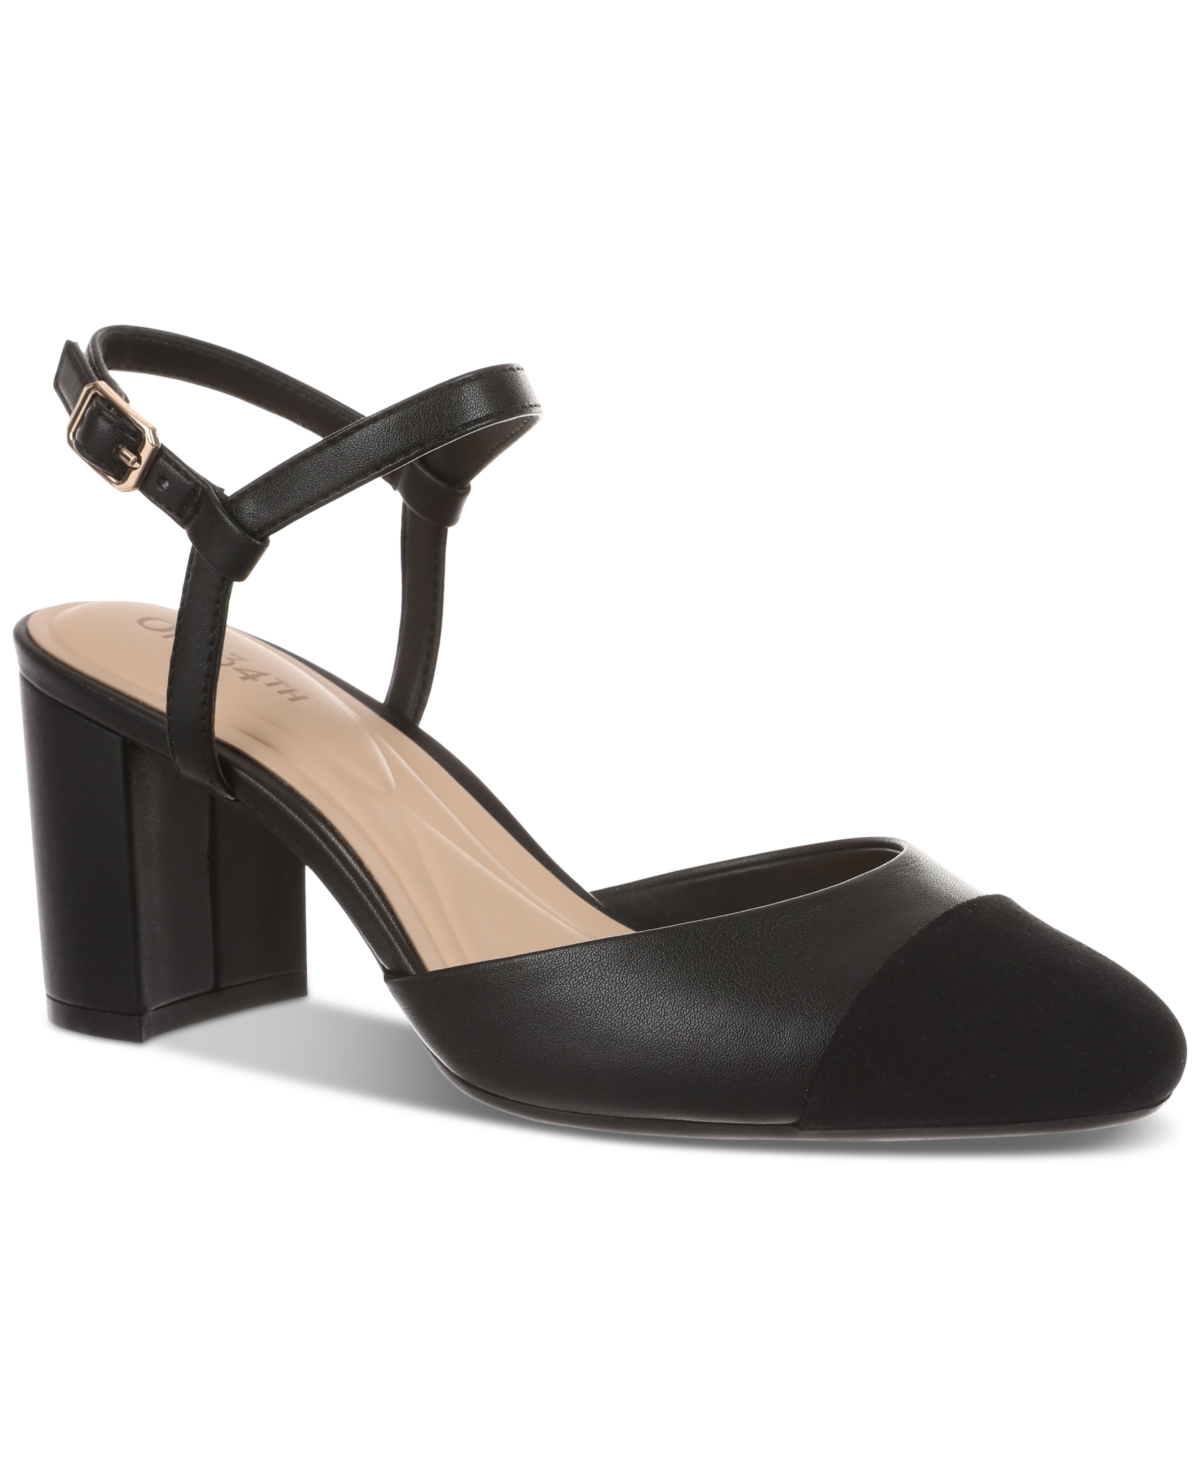 Women's Dotti Captoe Pumps, Created for Macy's - Nude/Black Smooth